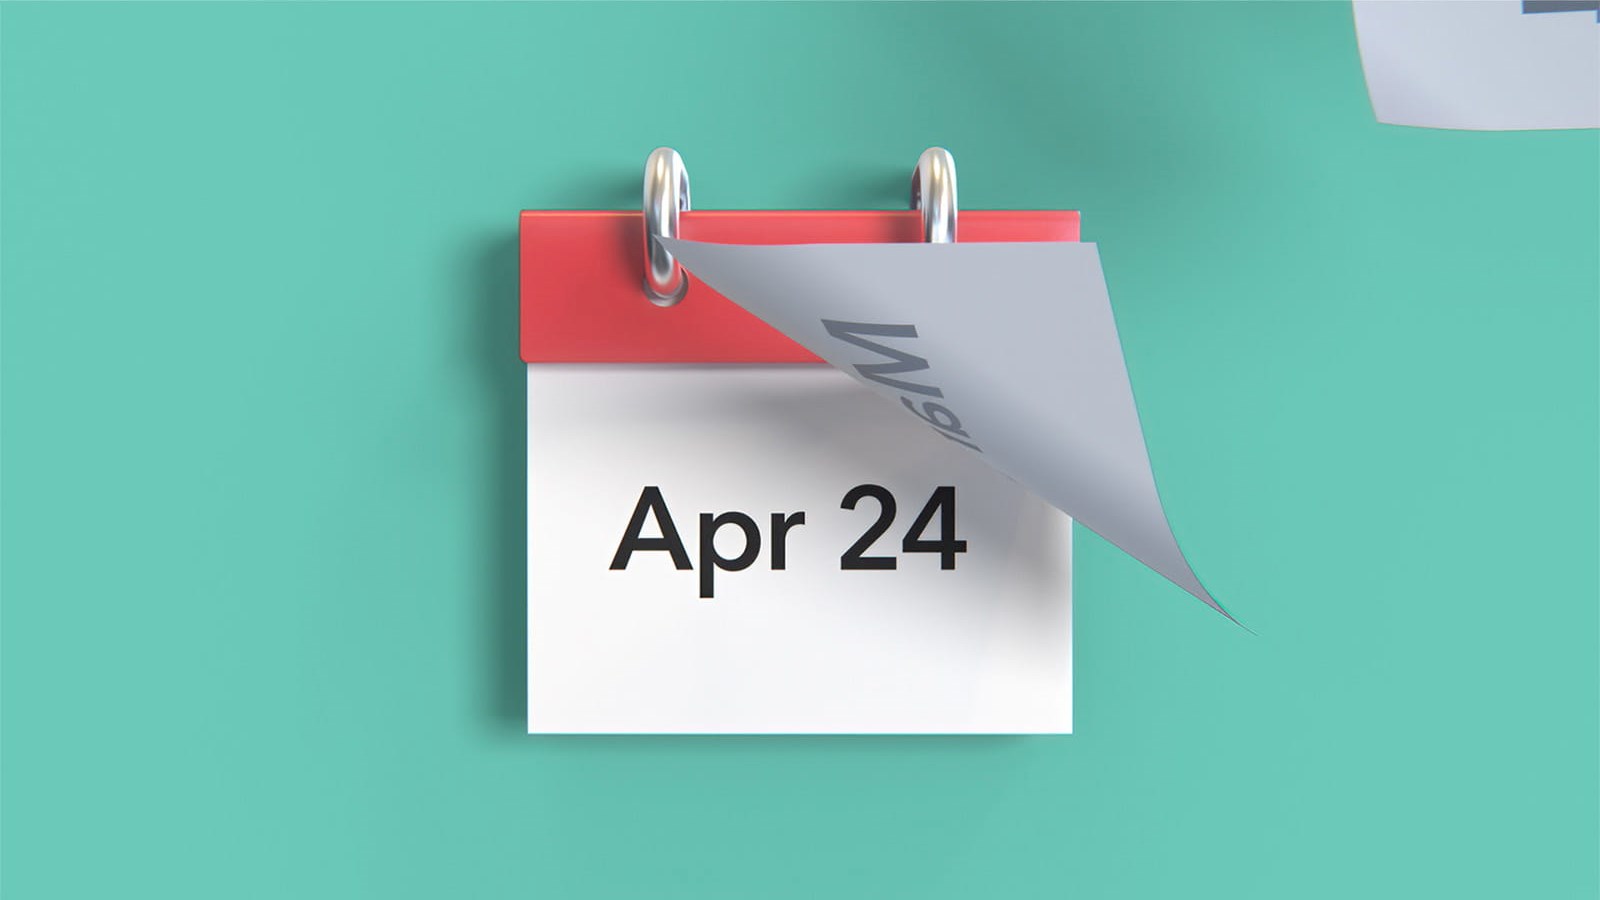 calendar dates pages flipping flying away April Apr 24 tax year changes